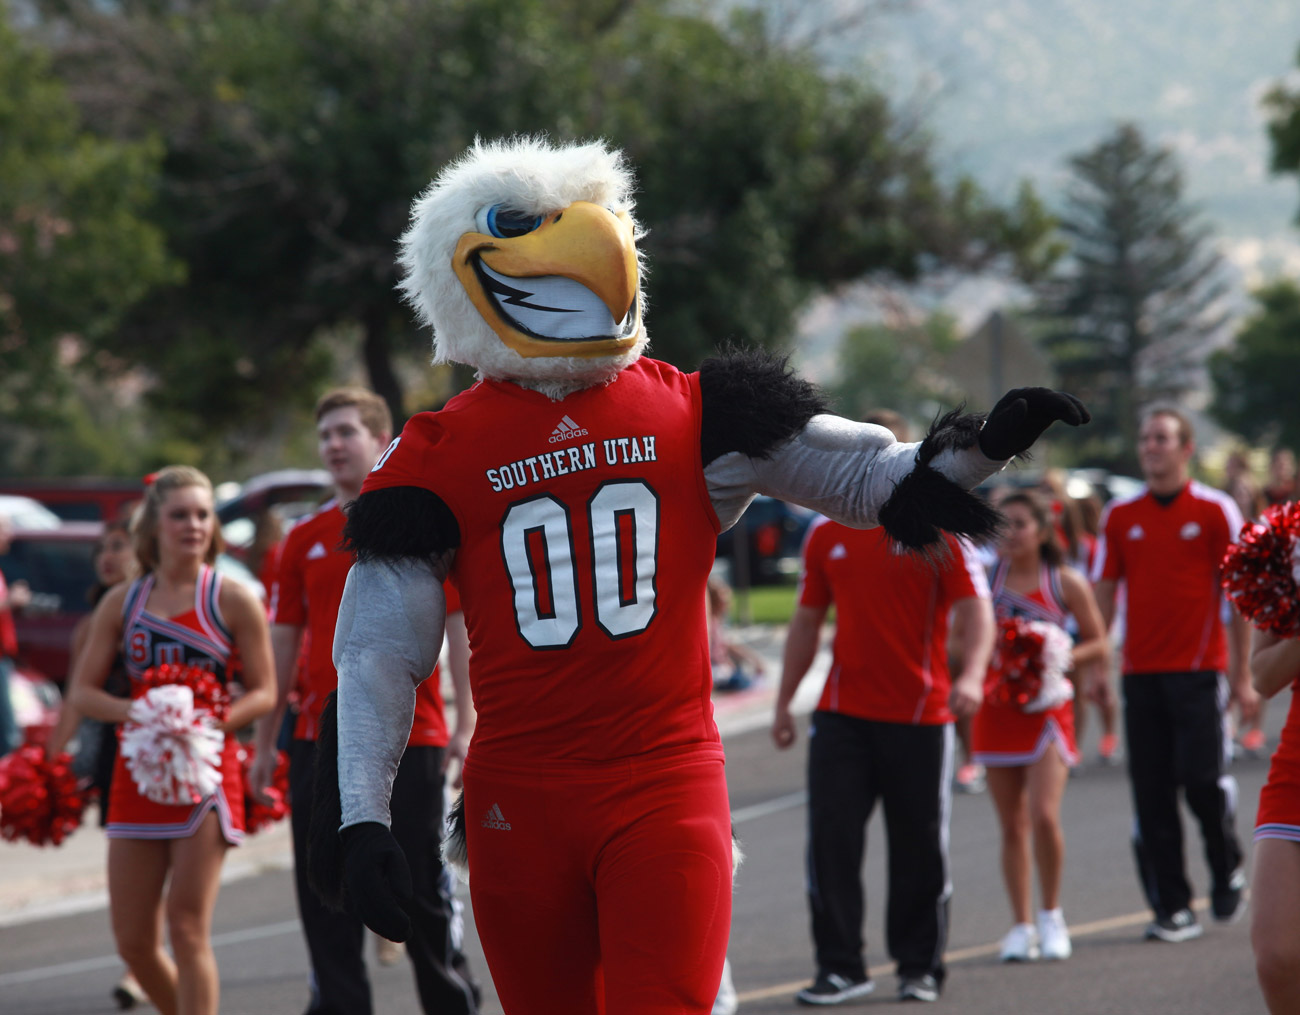 2015 SUU homecoming, Thor during annual parade